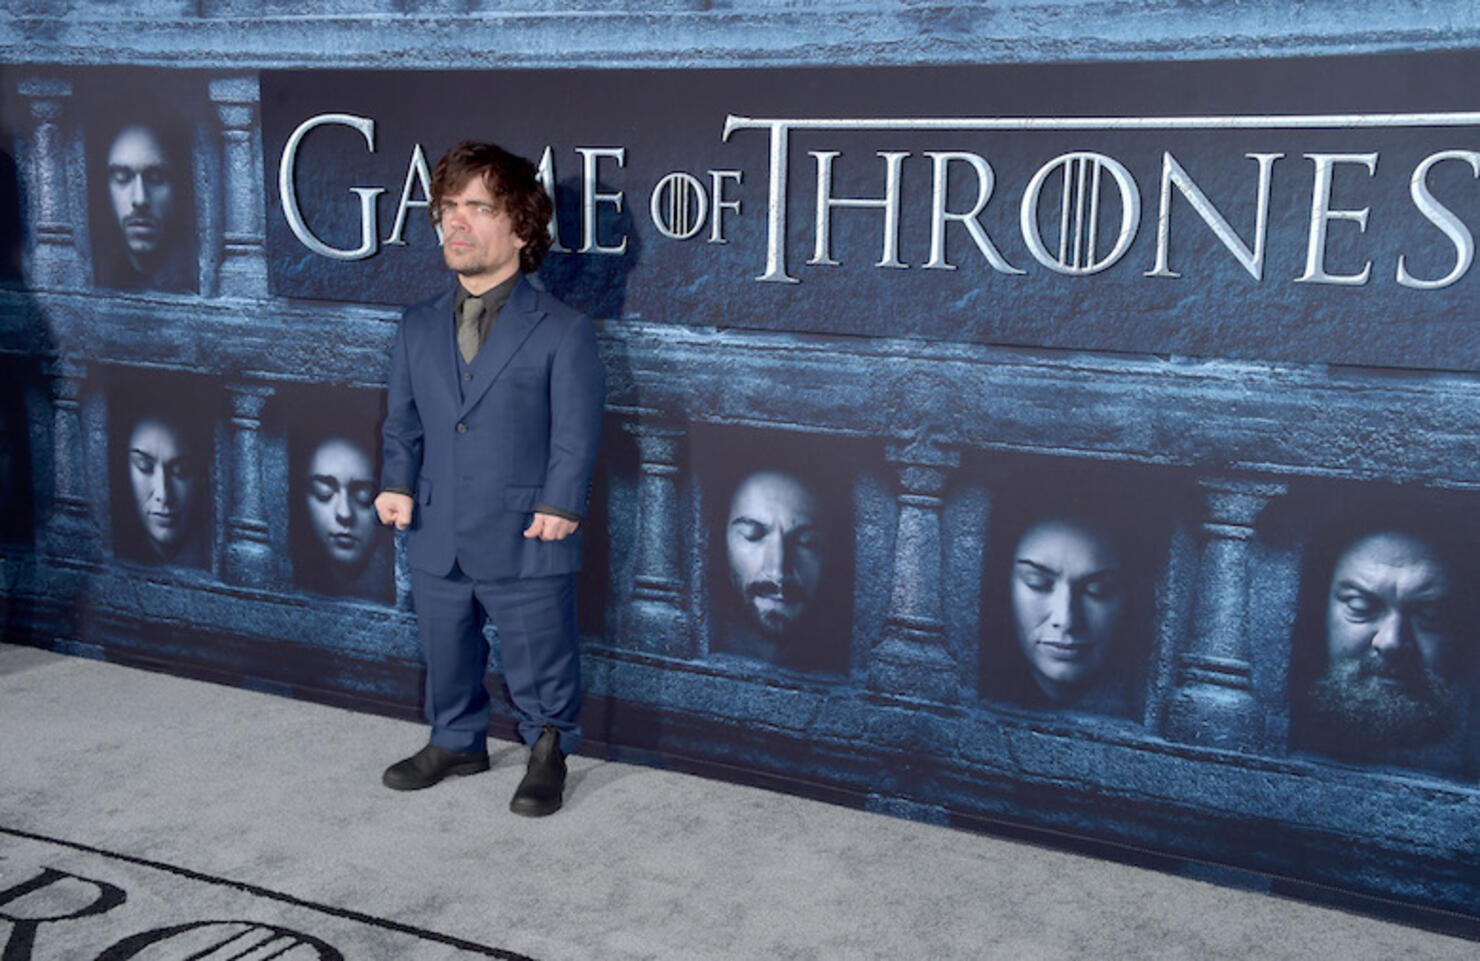 Premiere Of HBO's "Game Of Thrones" Season 6 - Arrivals